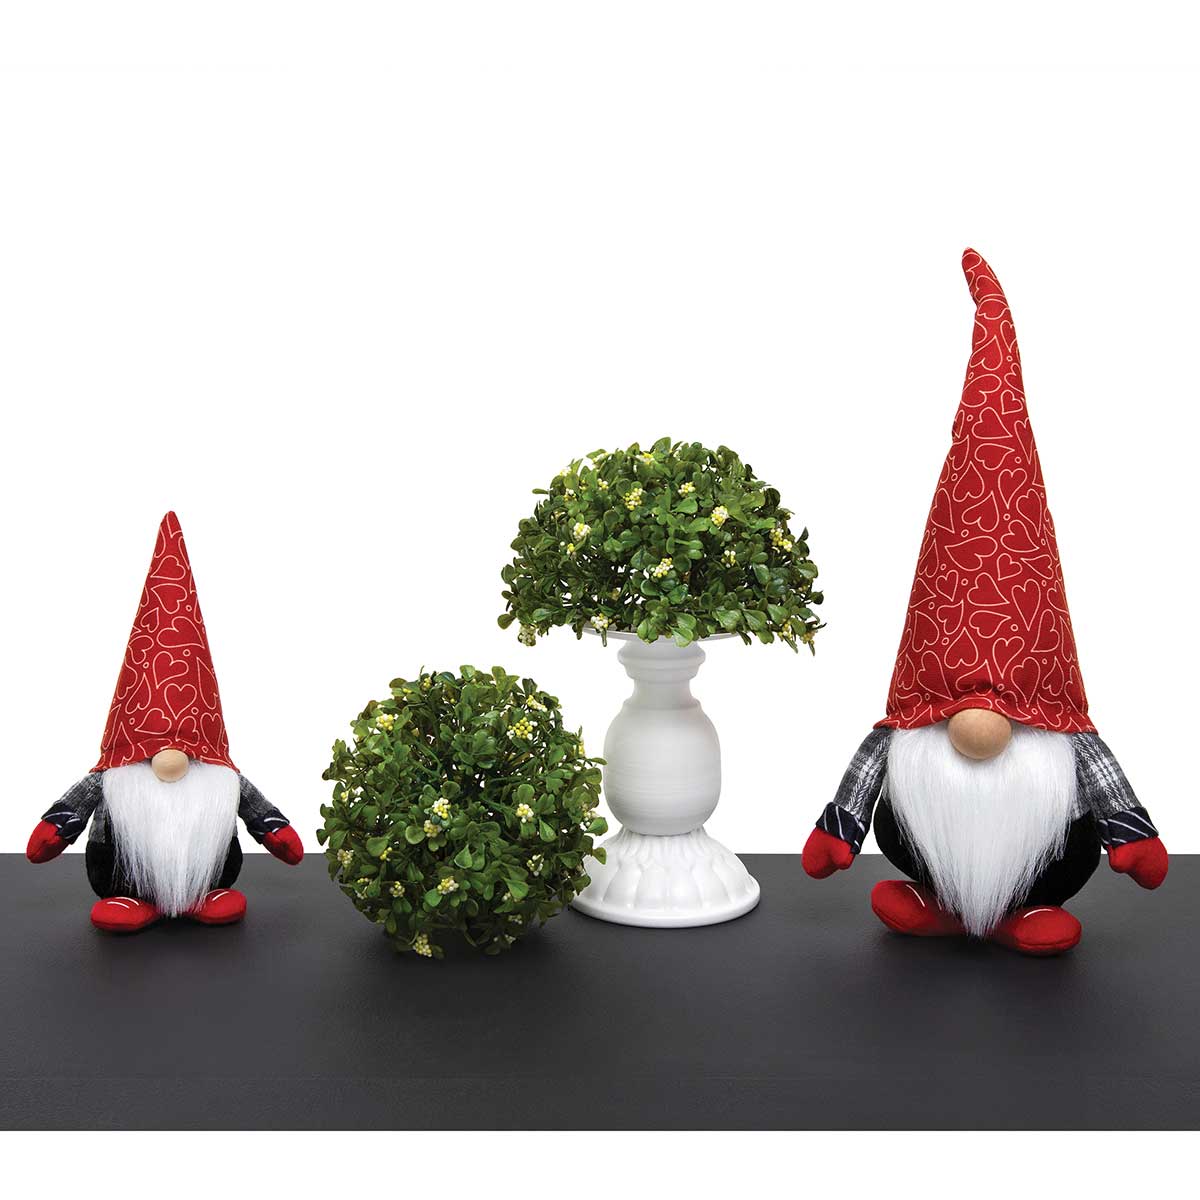 b70 GNOME ROMEO HEART HAT LARGE 5IN X 3.5IN X 12.75IN RED/BLACK